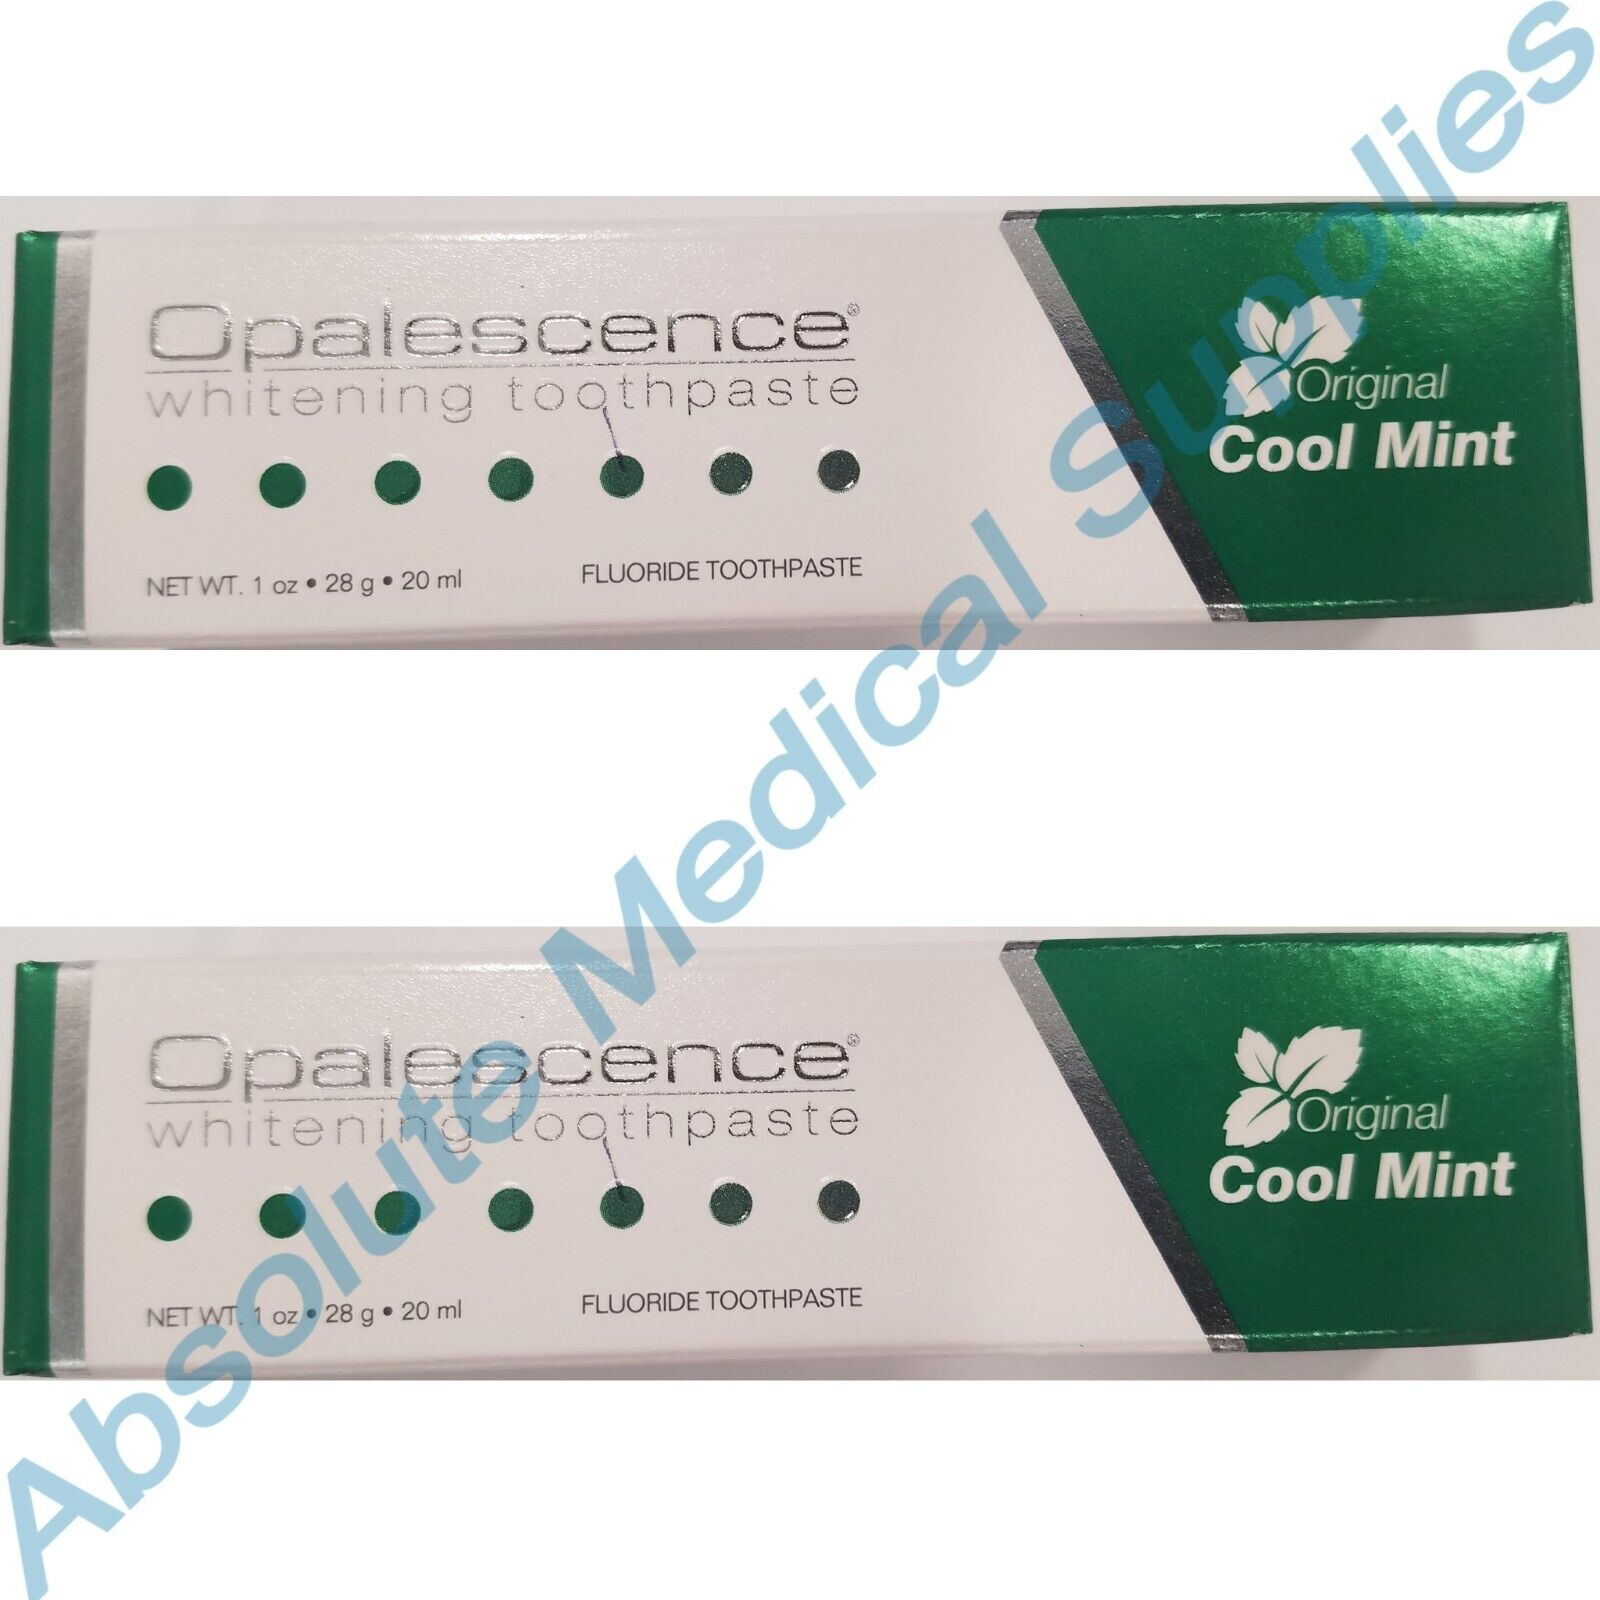 *2-Pack* Opalescence Whitening Toothpaste 1 Oz Fluoride Original Cool Mint 402 Opalescence UP-402